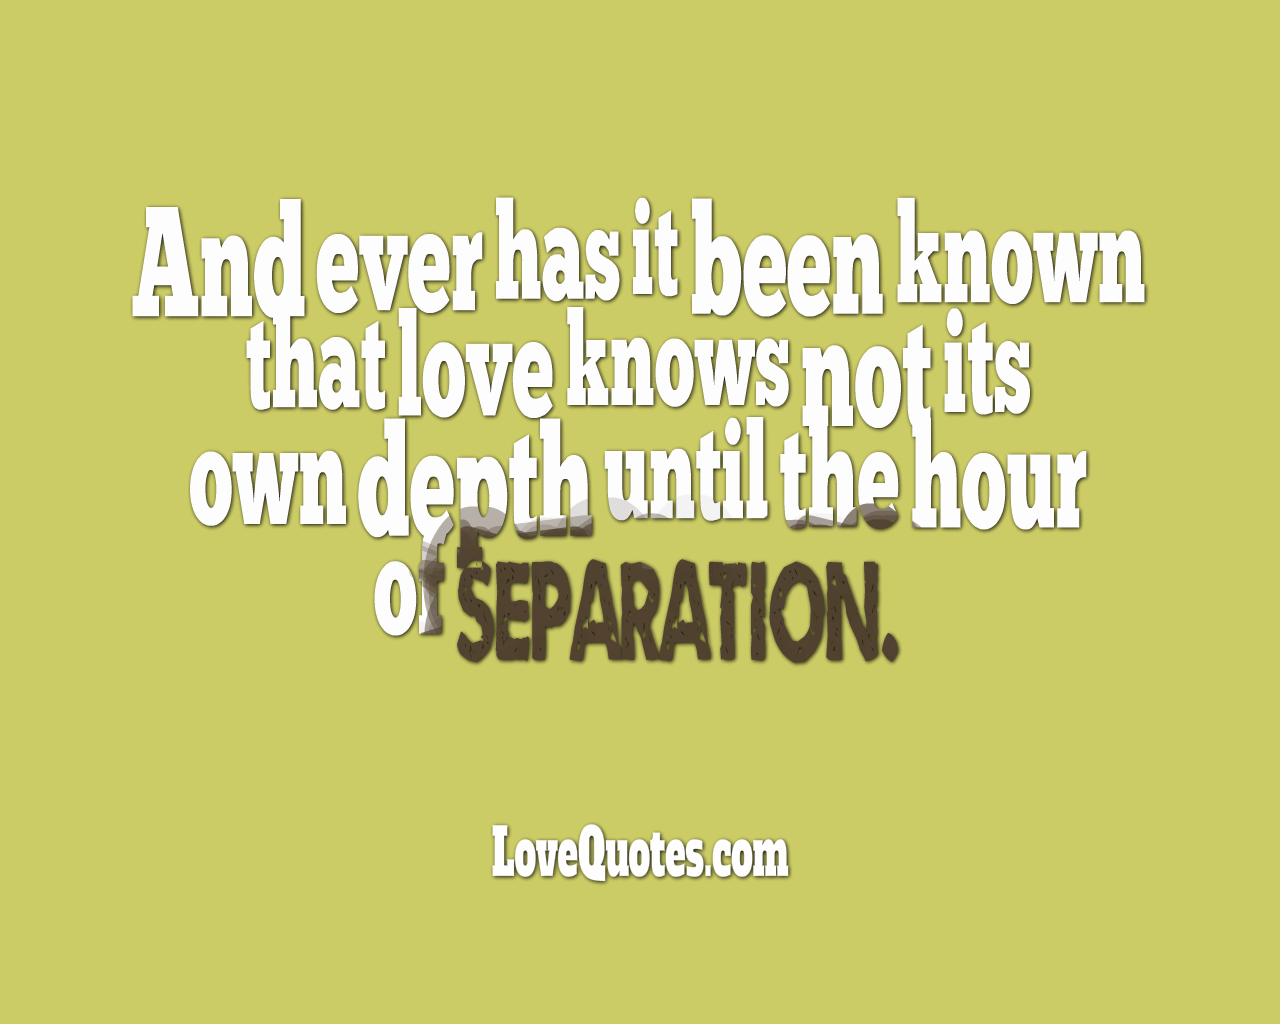 The Hour Of Separation